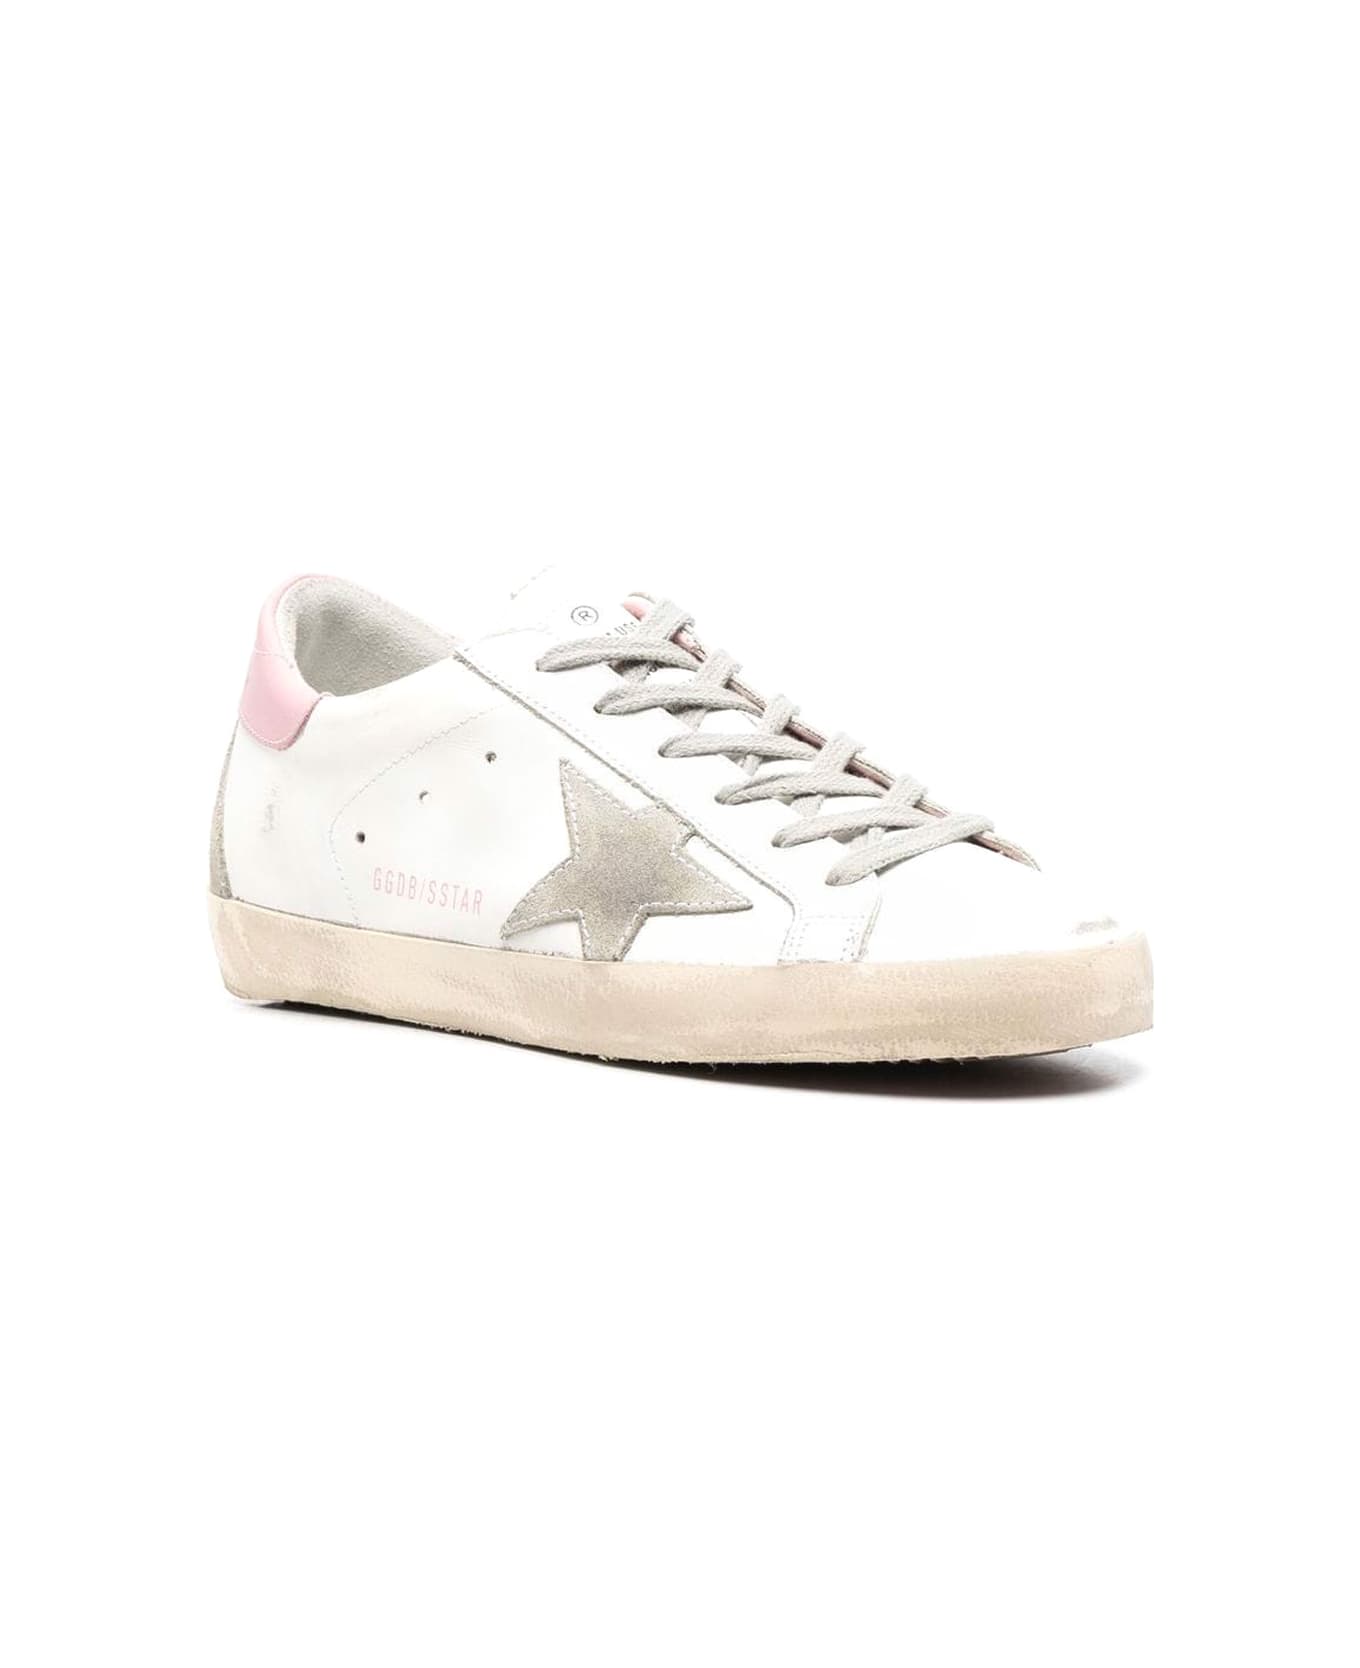 Golden Goose Super-star Leather Upper And Heel Suede Star And Spur Cream Sole - White Ice Light Pink